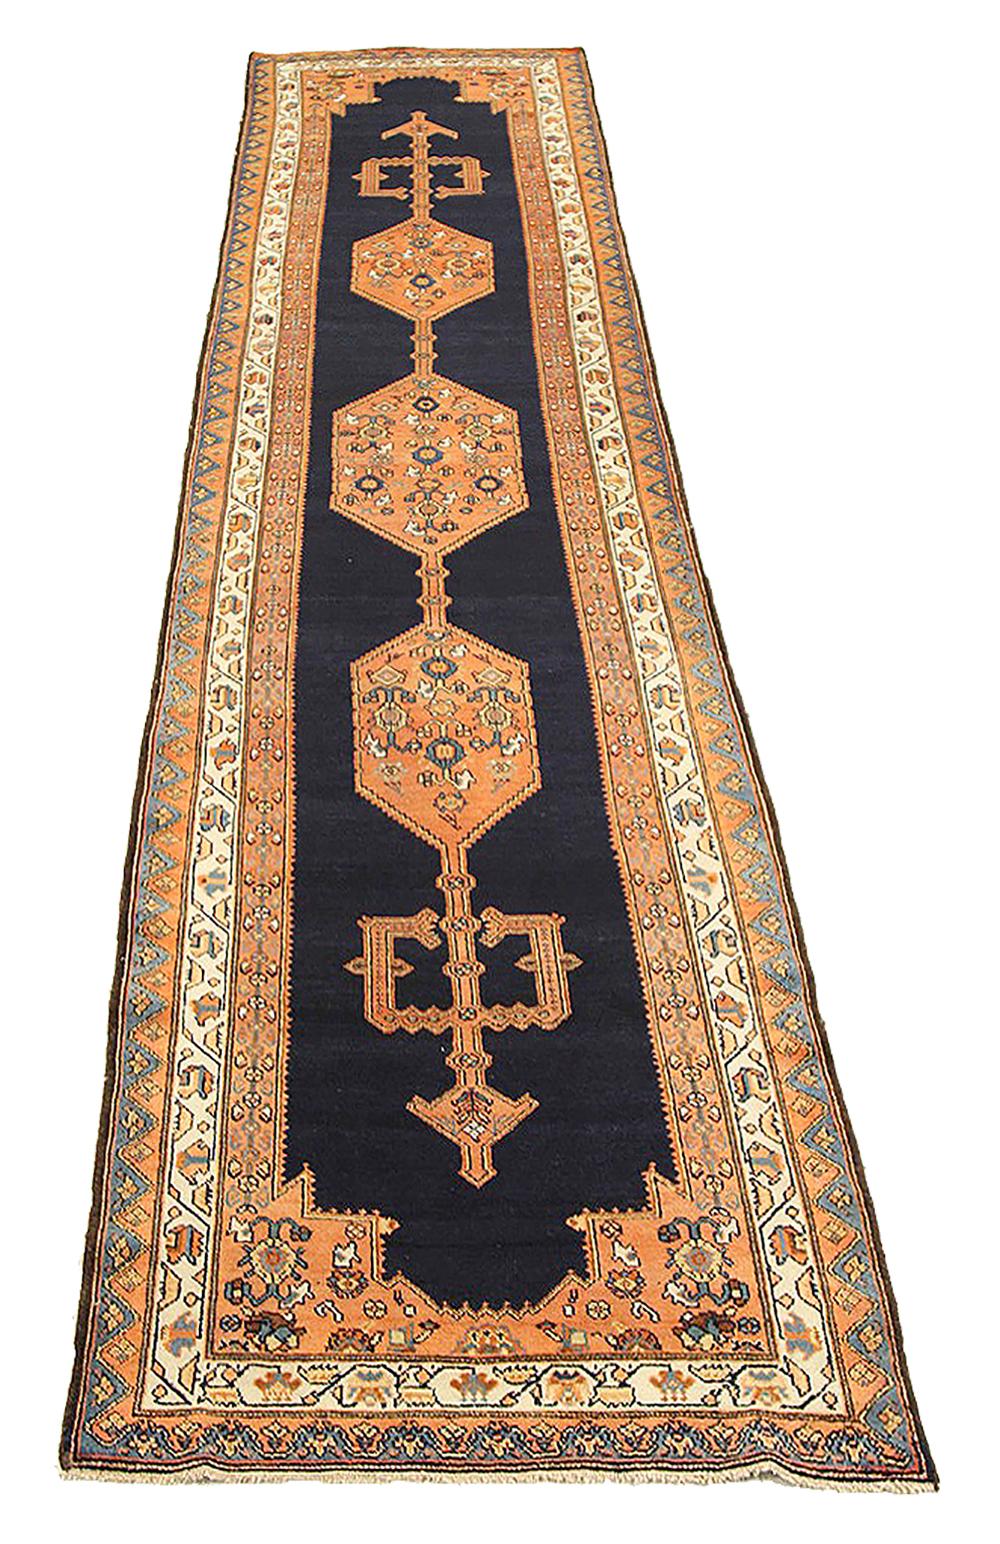 Antique Persian runner rug handwoven from the finest sheep’s wool and colored with all-natural vegetable dyes that are safe for humans and pets. It’s a traditional Malayer design featuring a beautiful combination of geometric details in blue and